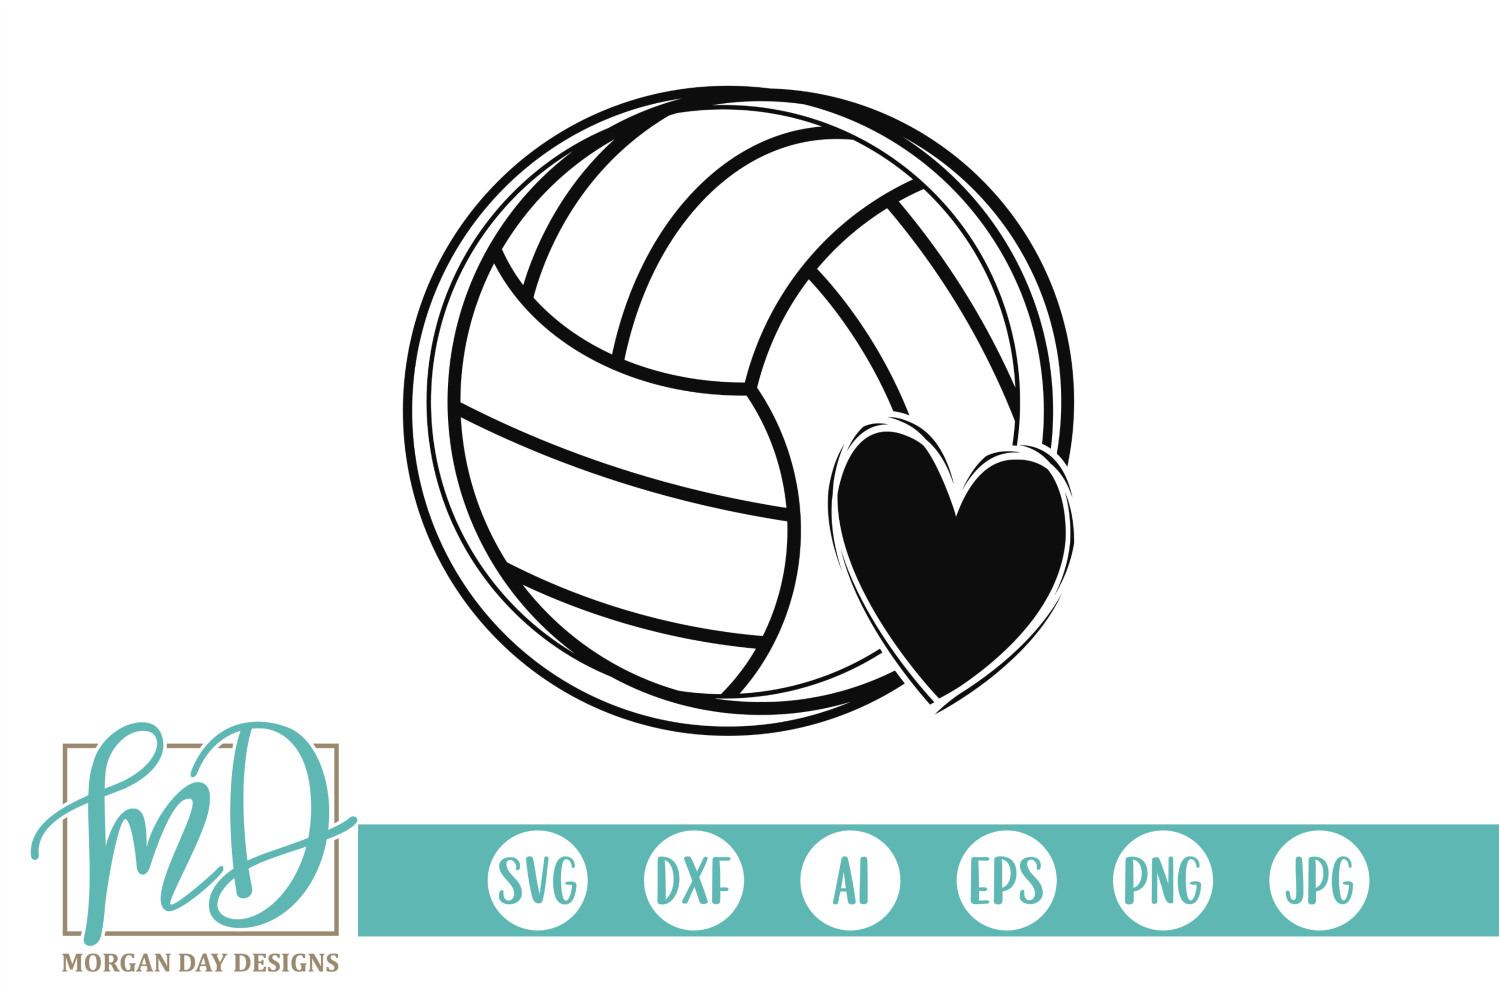 Download Volleyball with Heart SVG, DXF, AI, EPS, PNG, JPEG